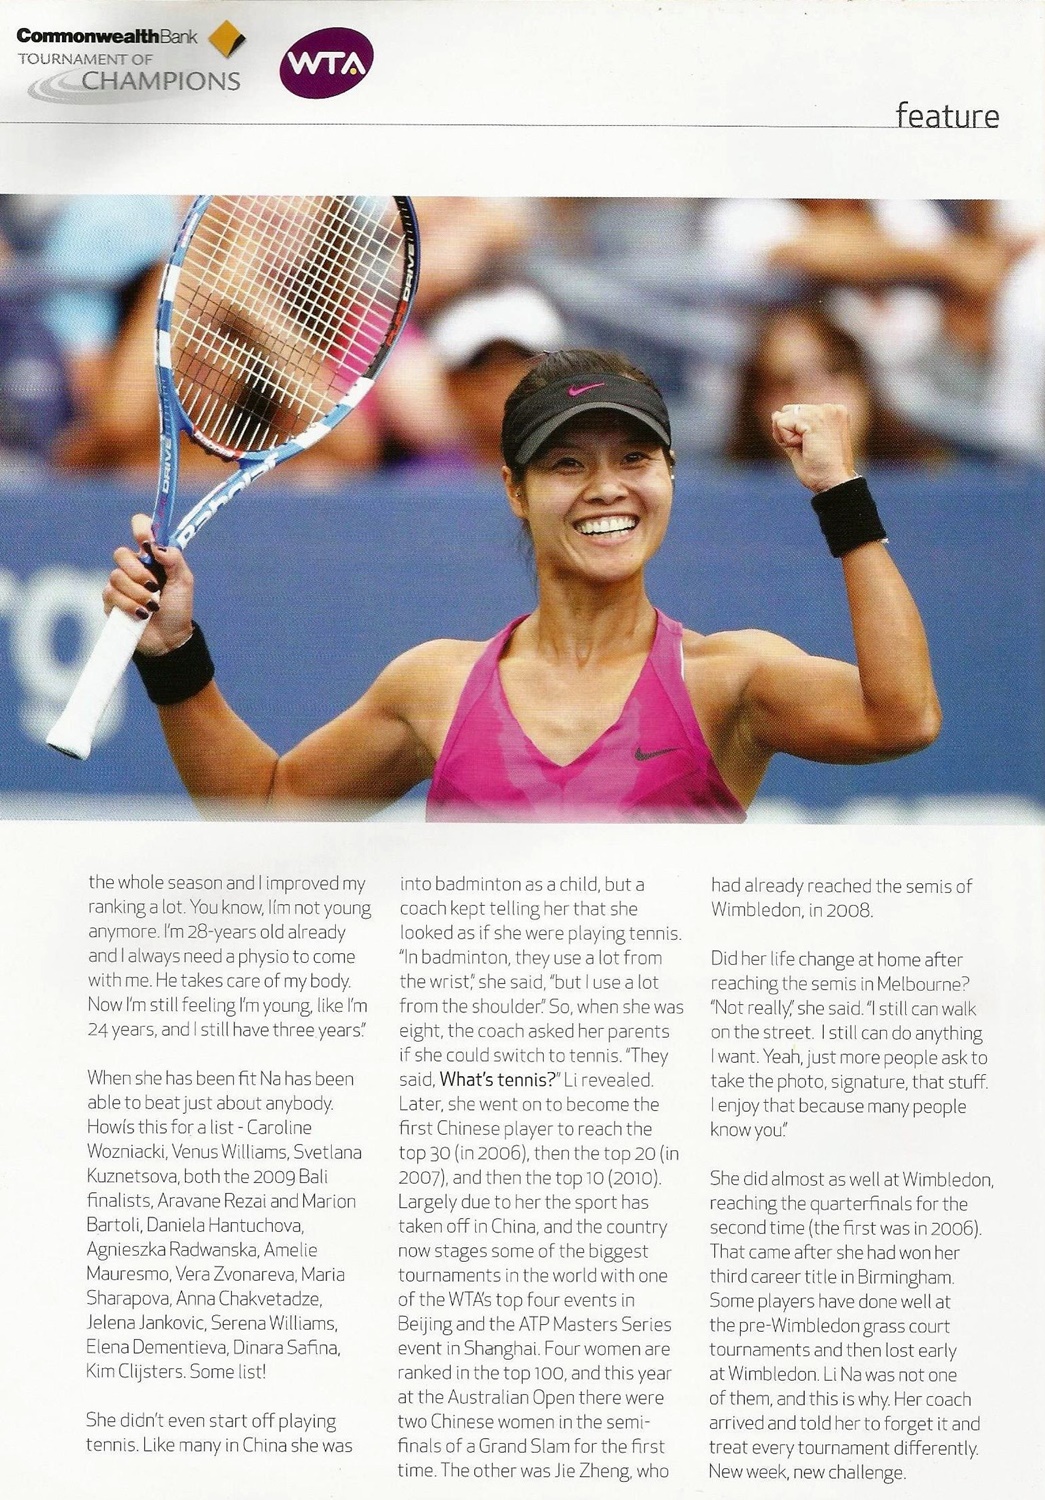 Cooking and Cleaning has to wait - Li Na has business to attend to #2 by Barry Wood